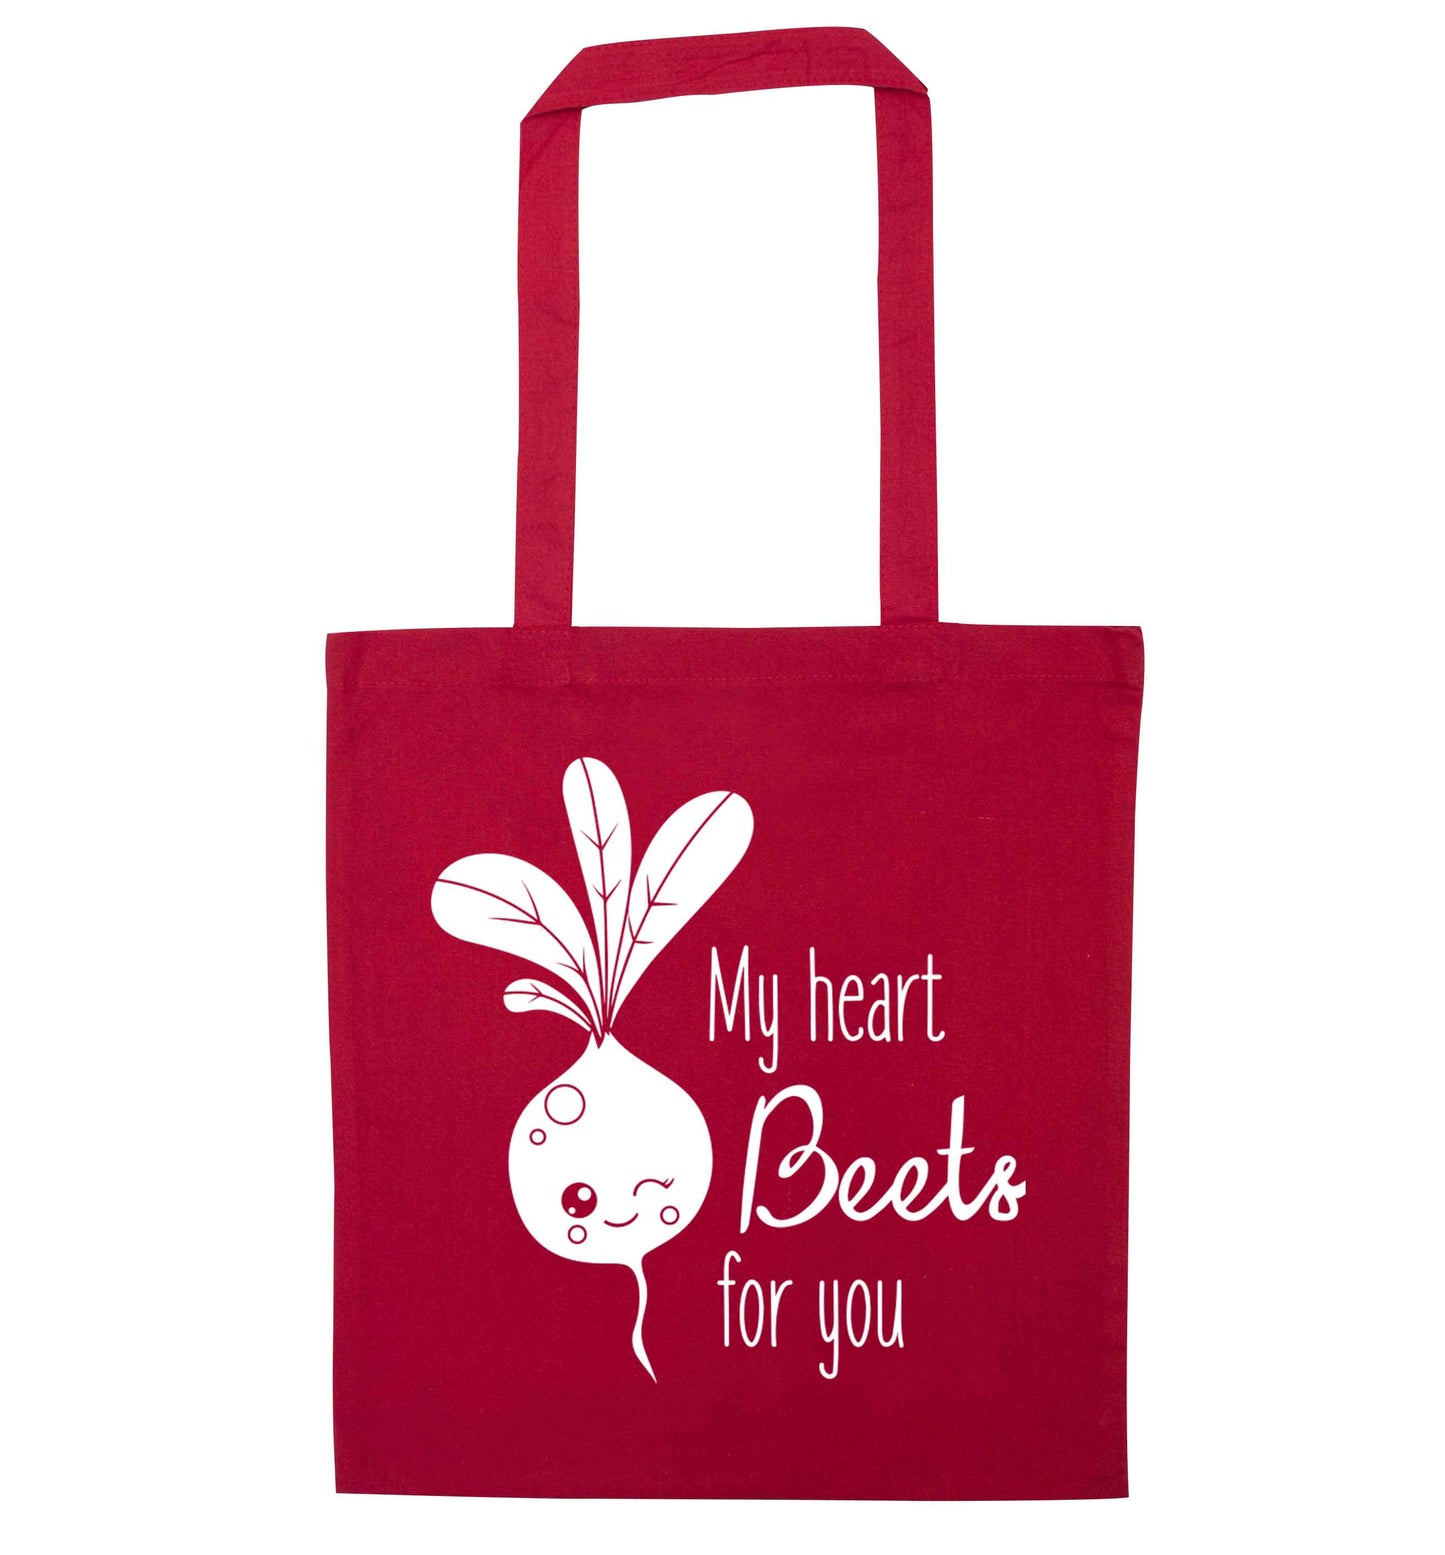 My heart beets for you red tote bag